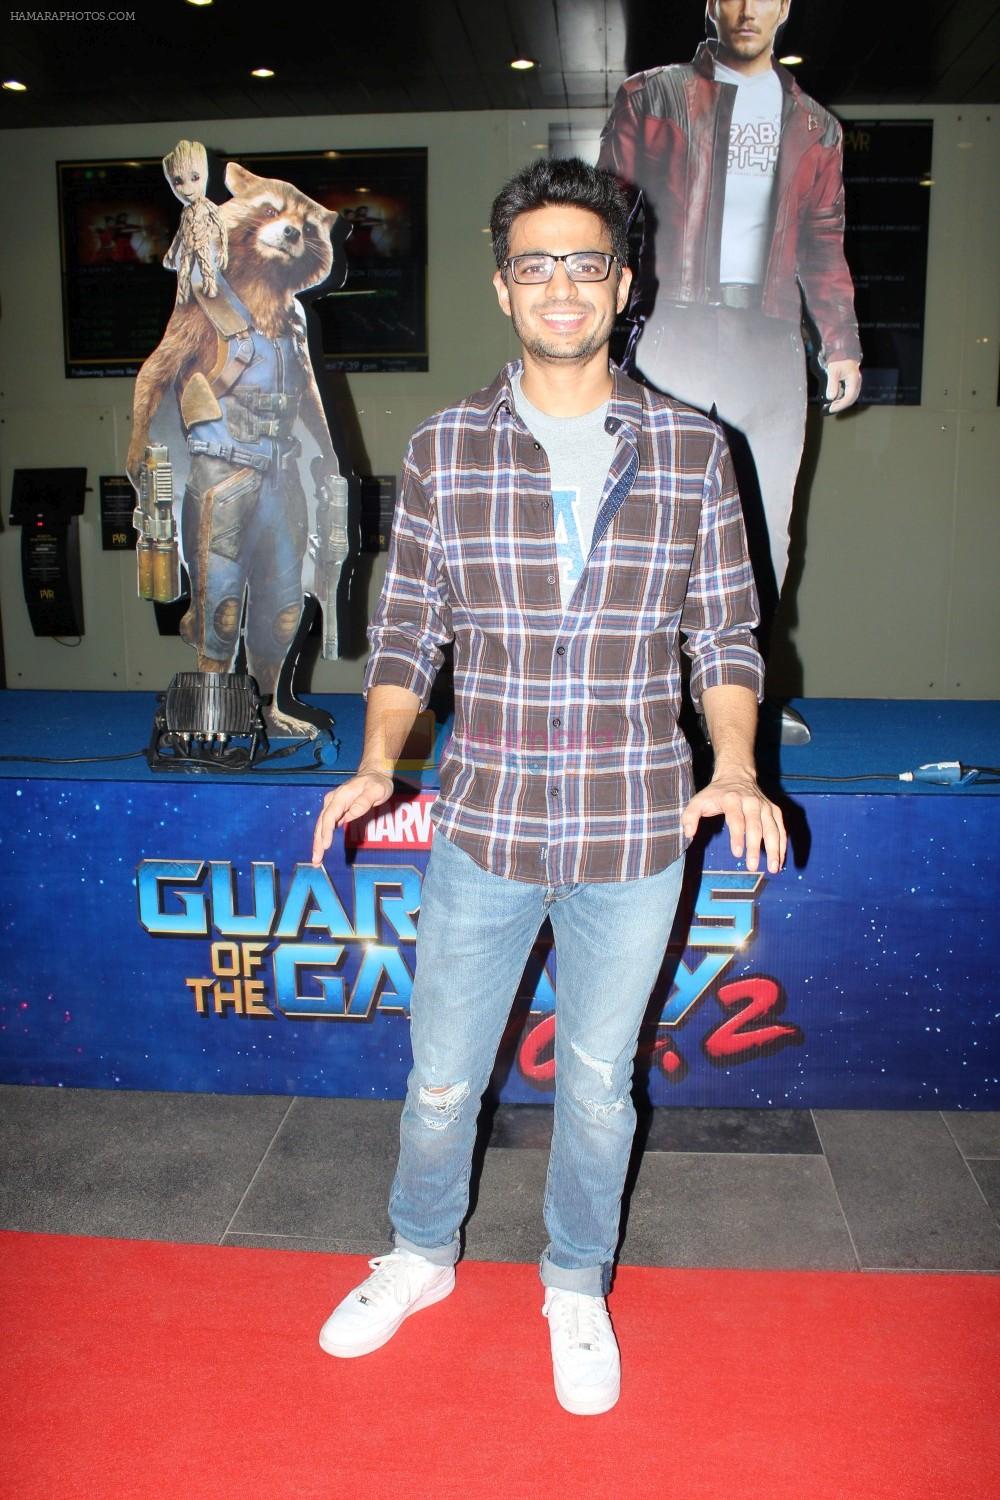 at The Red Carpet Premiere Of Guardians of the Galaxy Vol. 2 on 4th May 2017